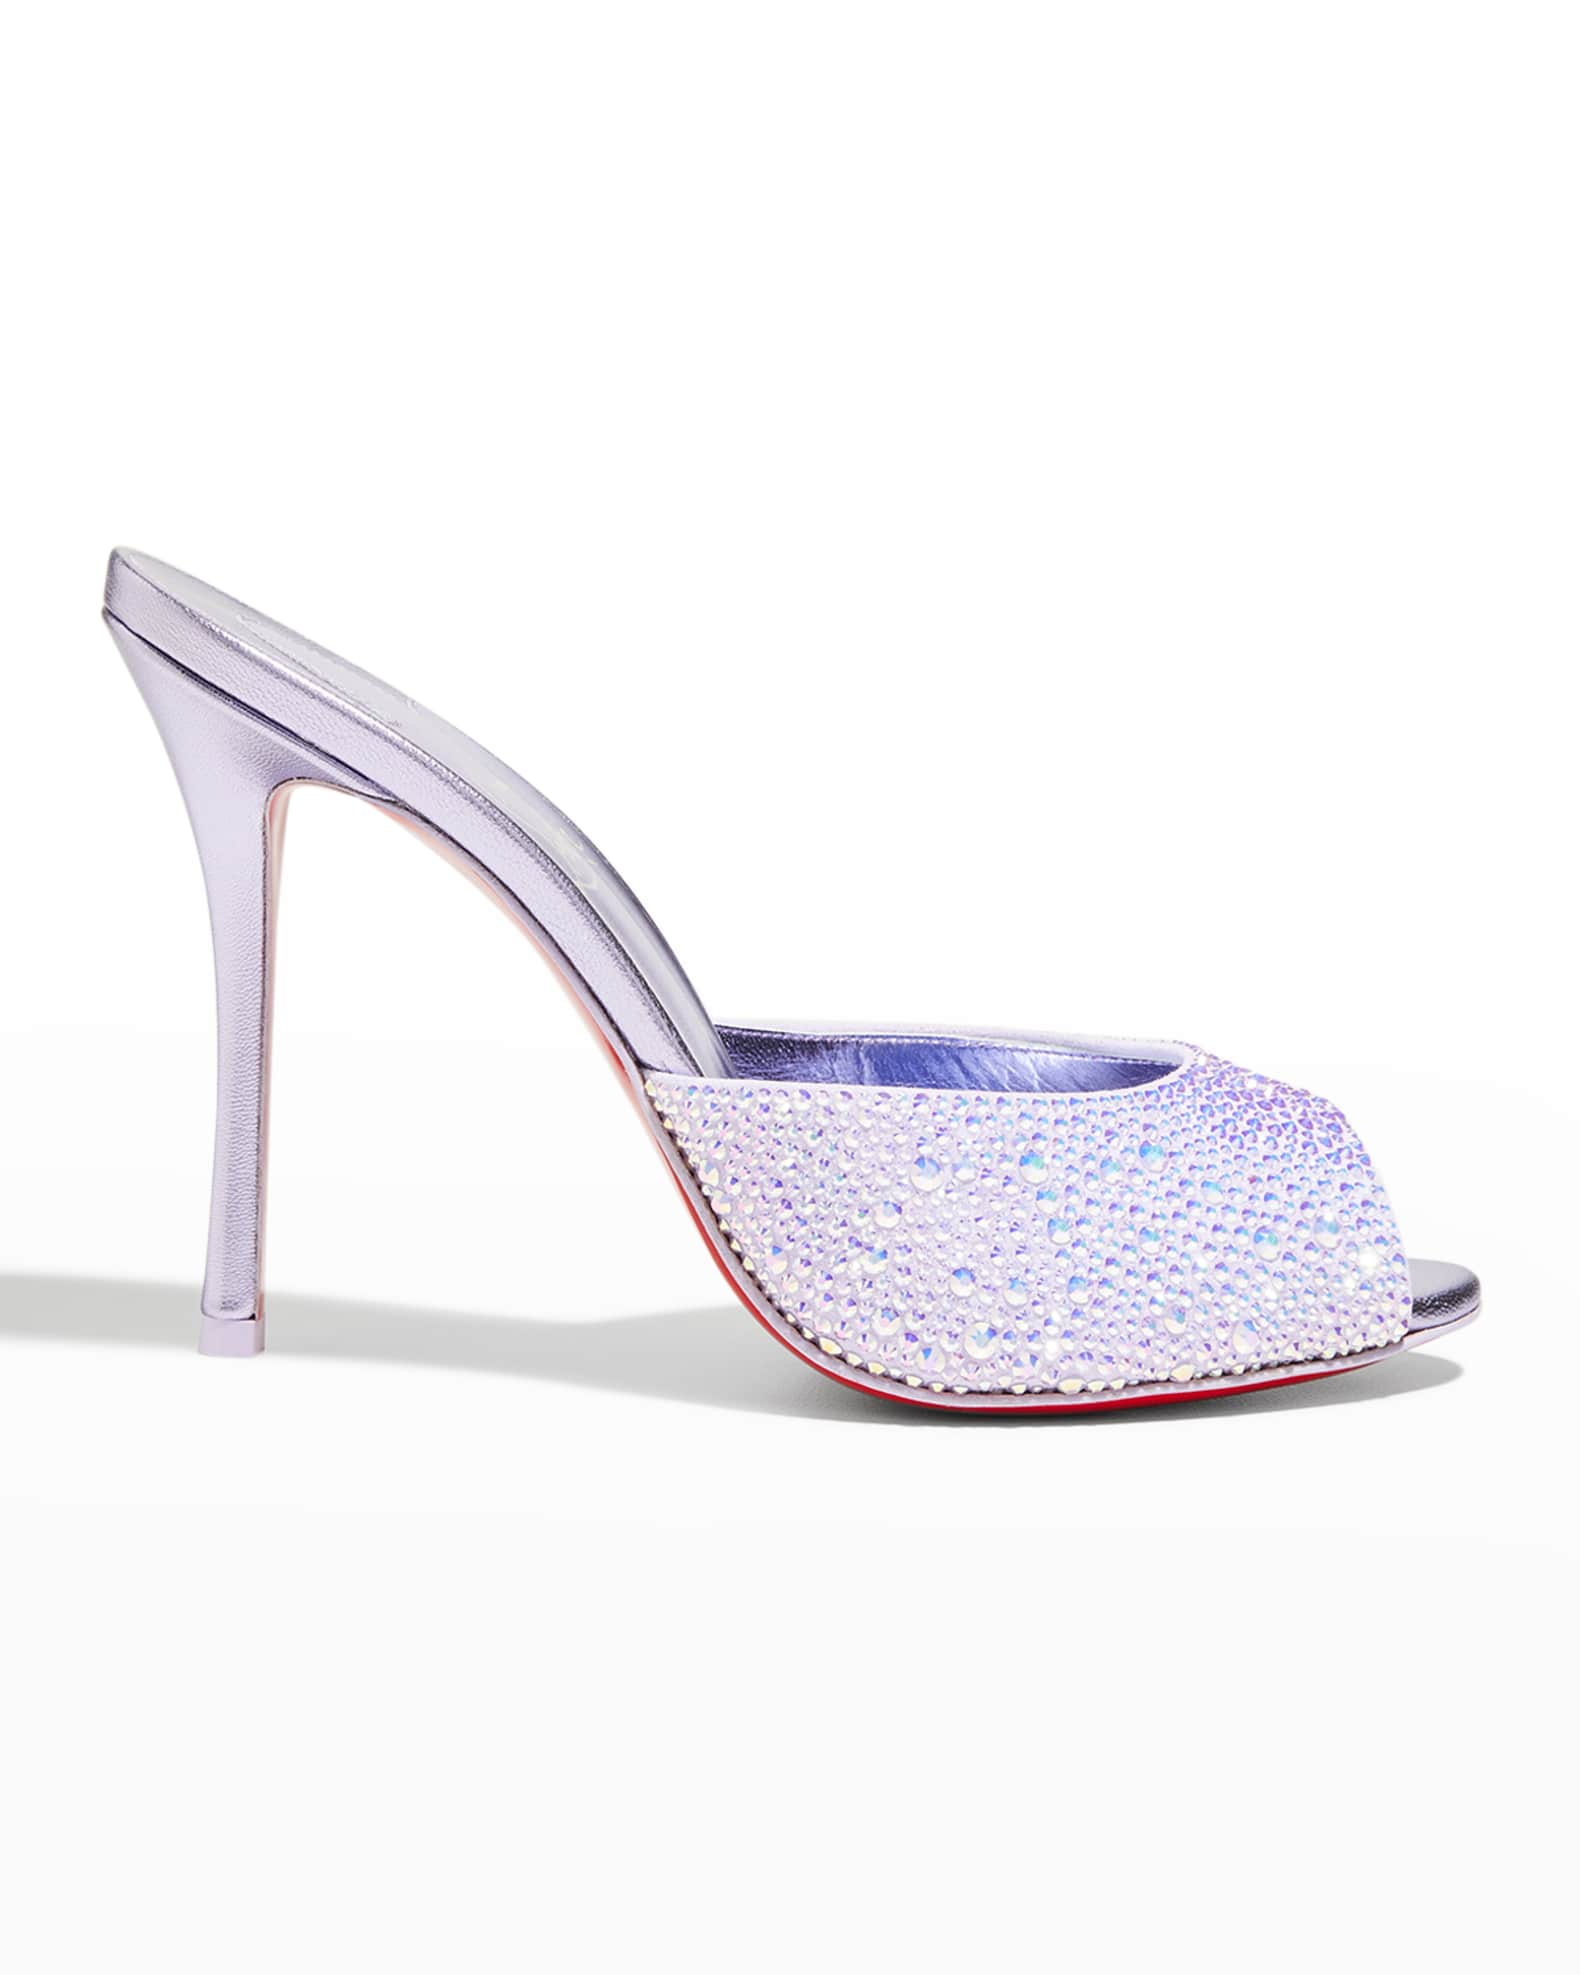 Christian Louboutin Me Dolly Strass Red Sole Slide Sandals | Neiman Marcus